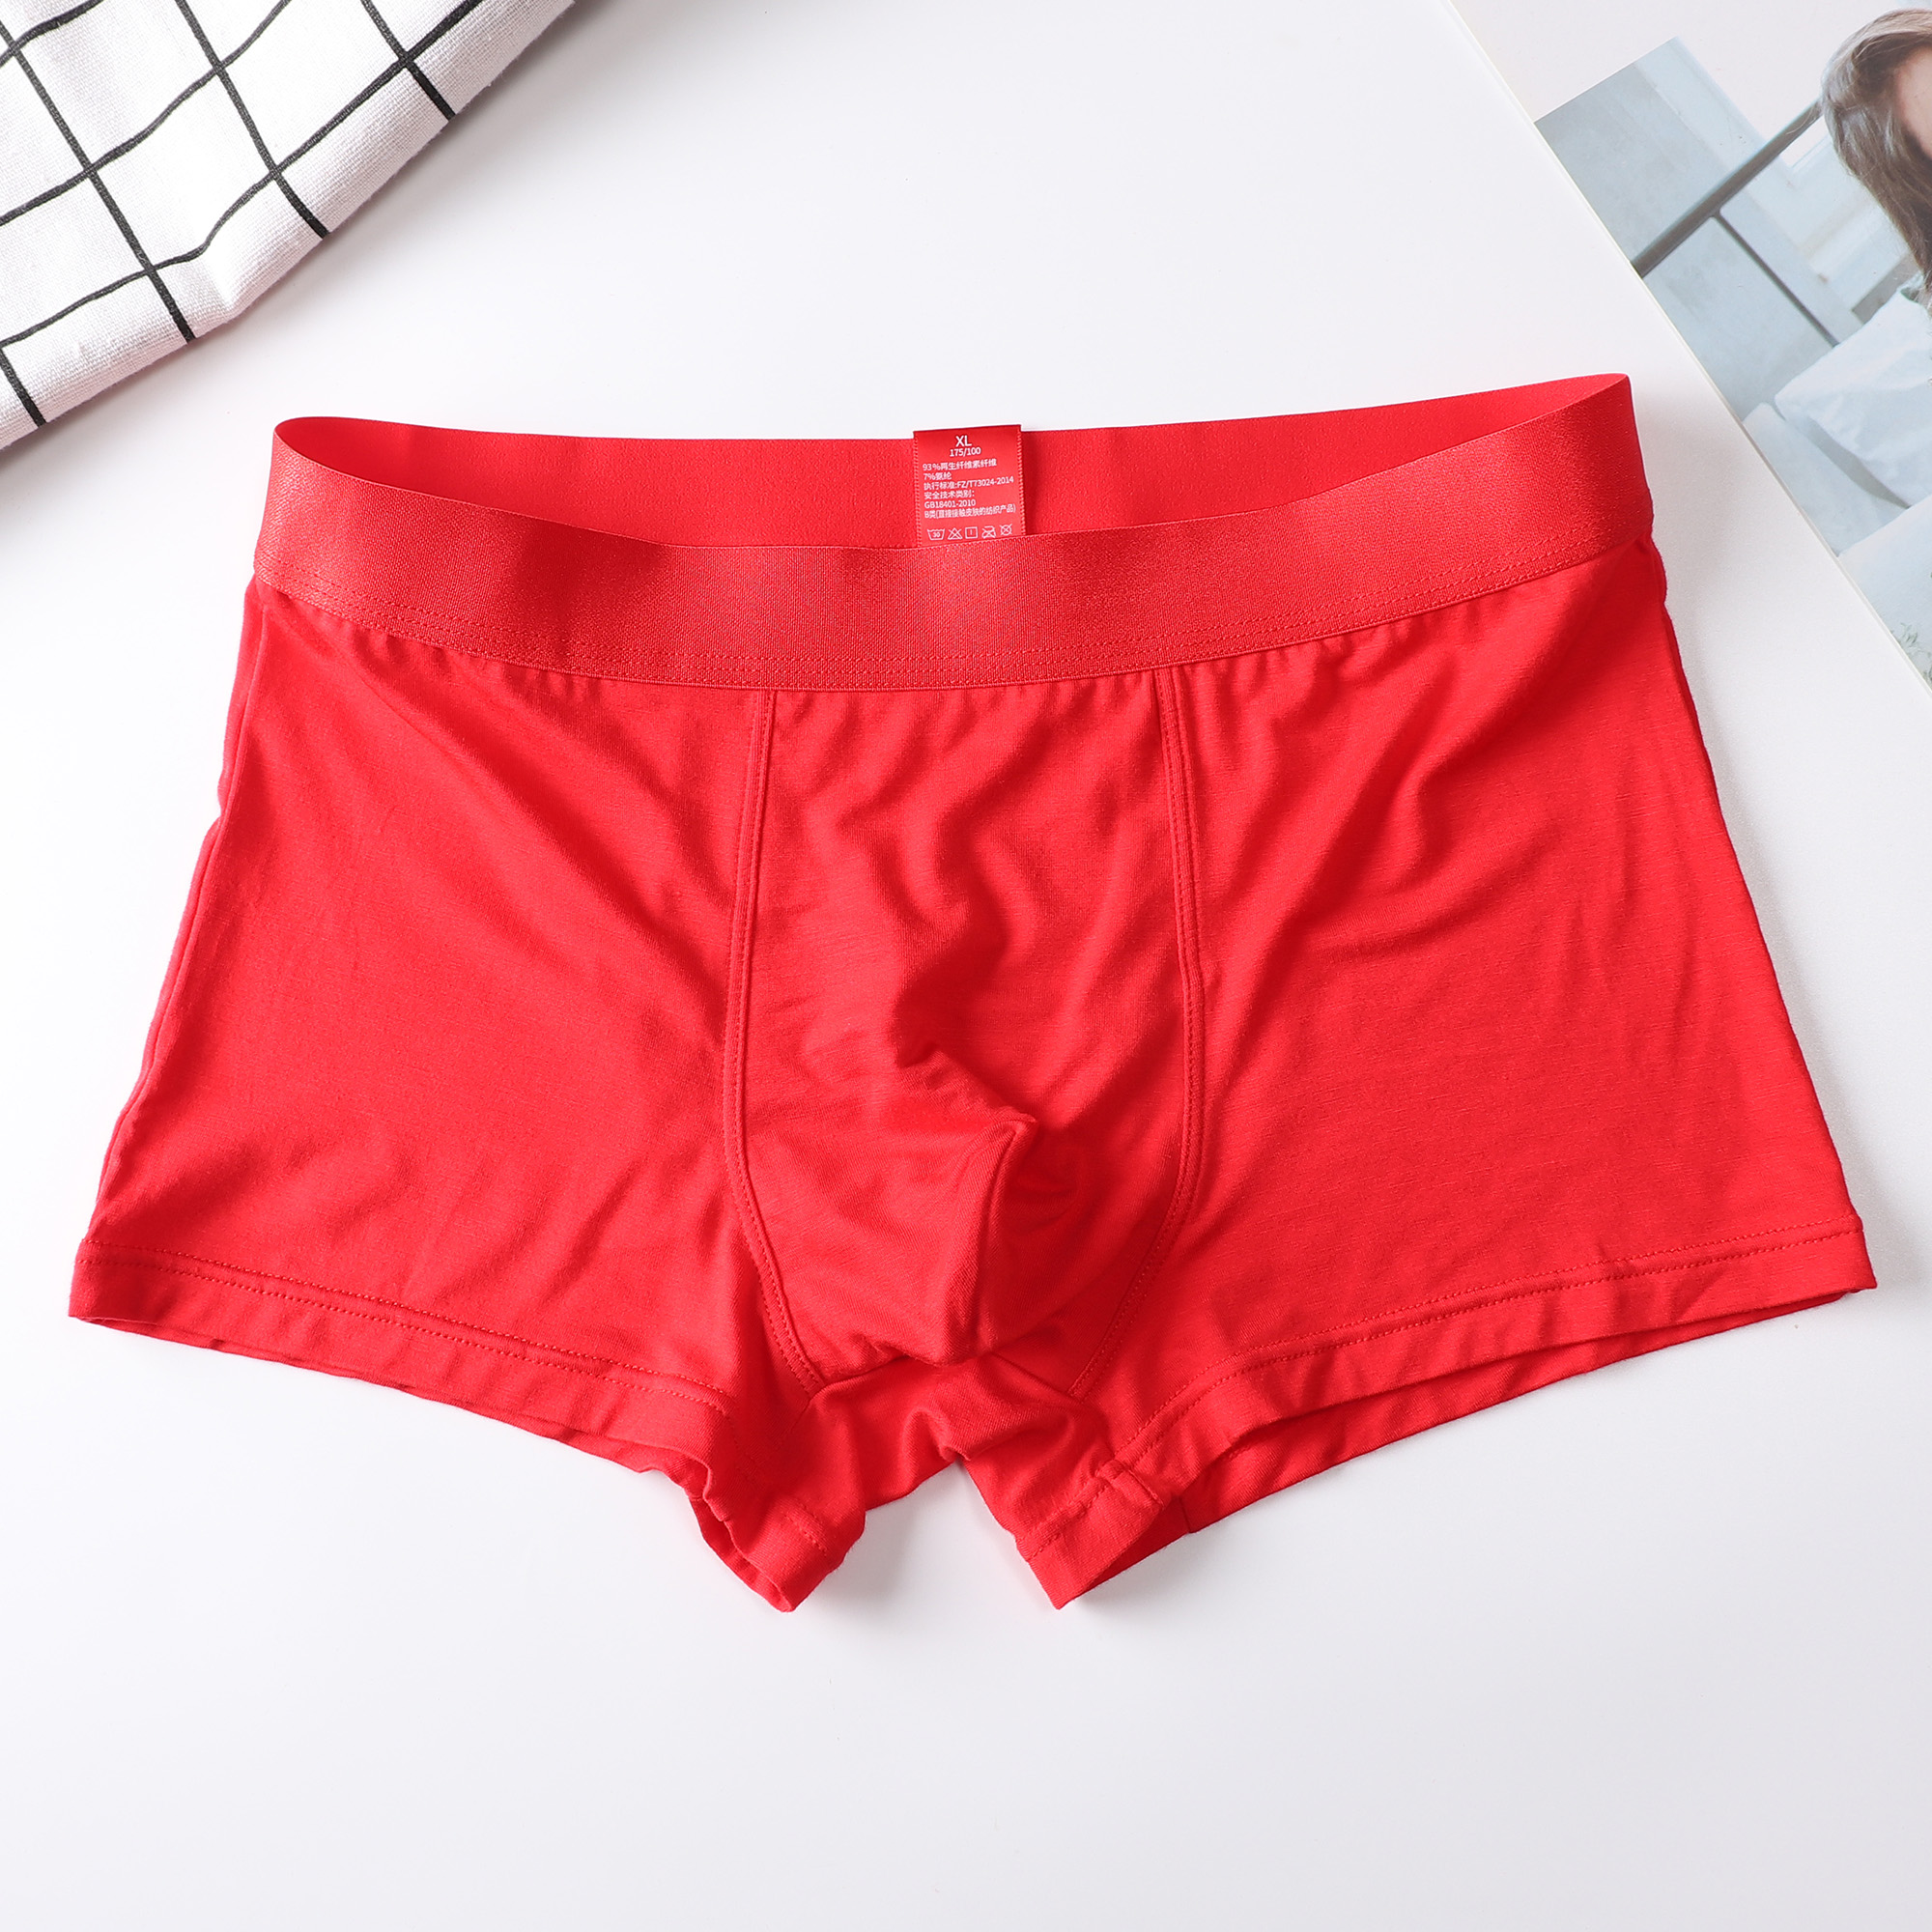 Red Underpants Men's Year of Fate Red Wedding Festive Lucky Men's Boxer ...